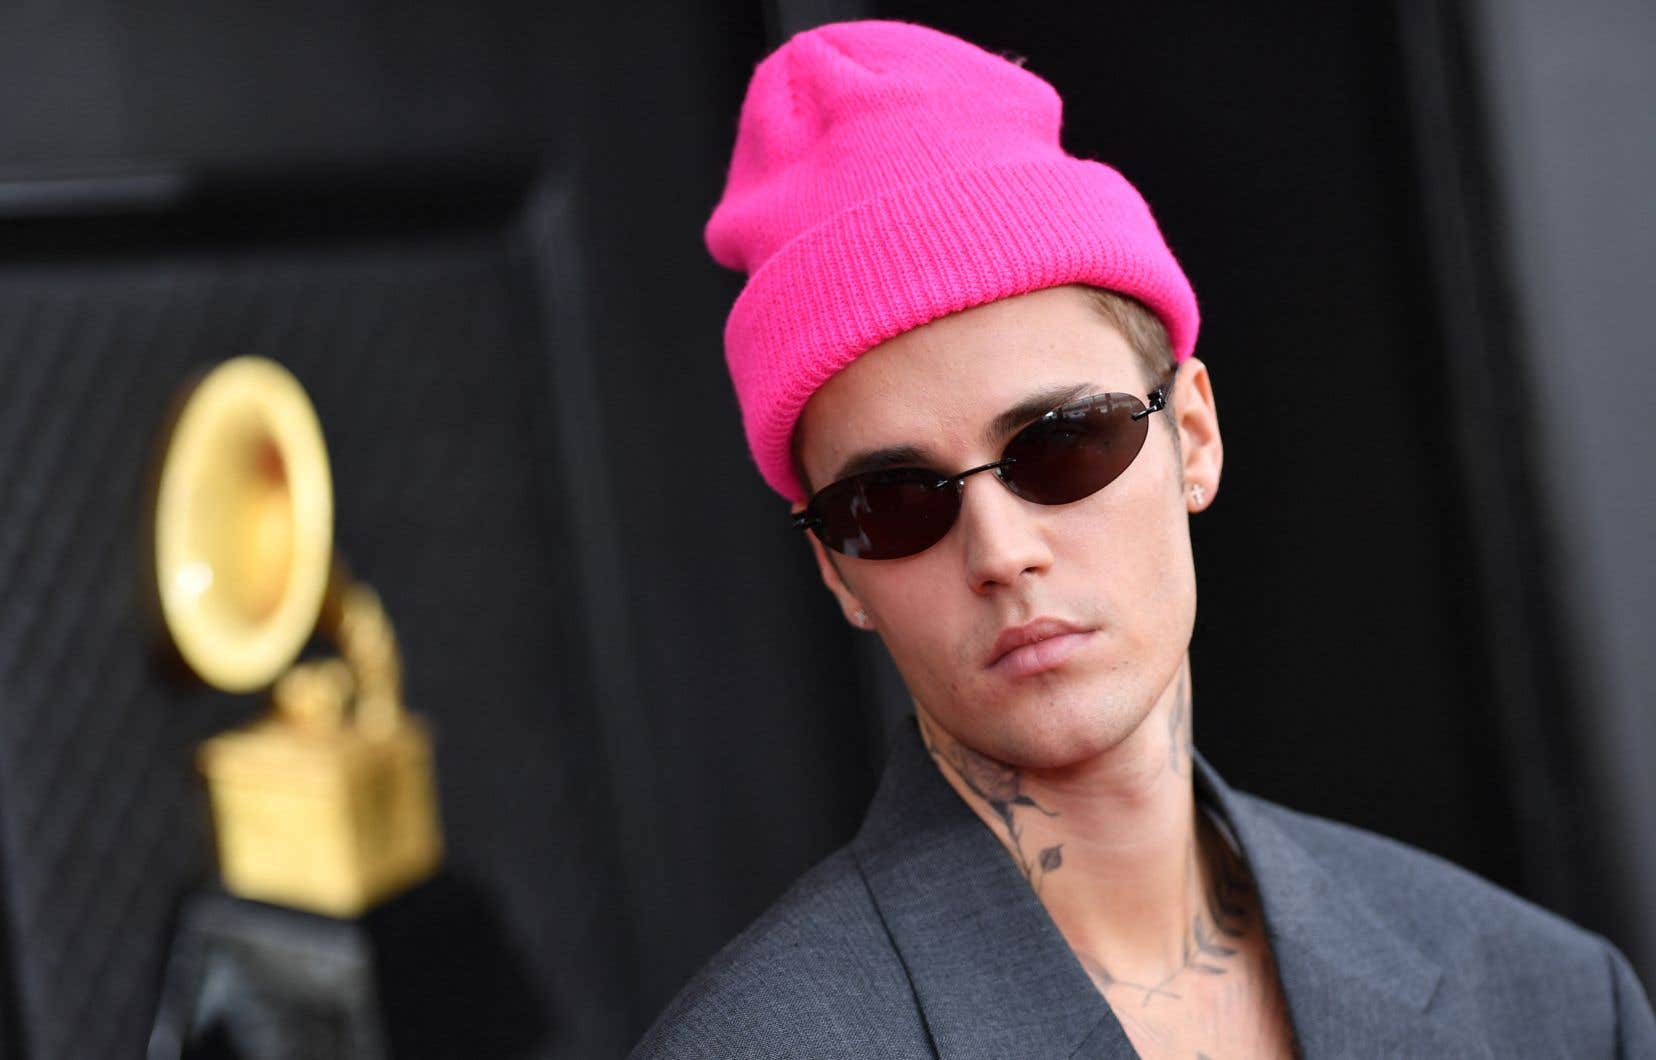 Justin Bieber's music may not be Canadian enough

